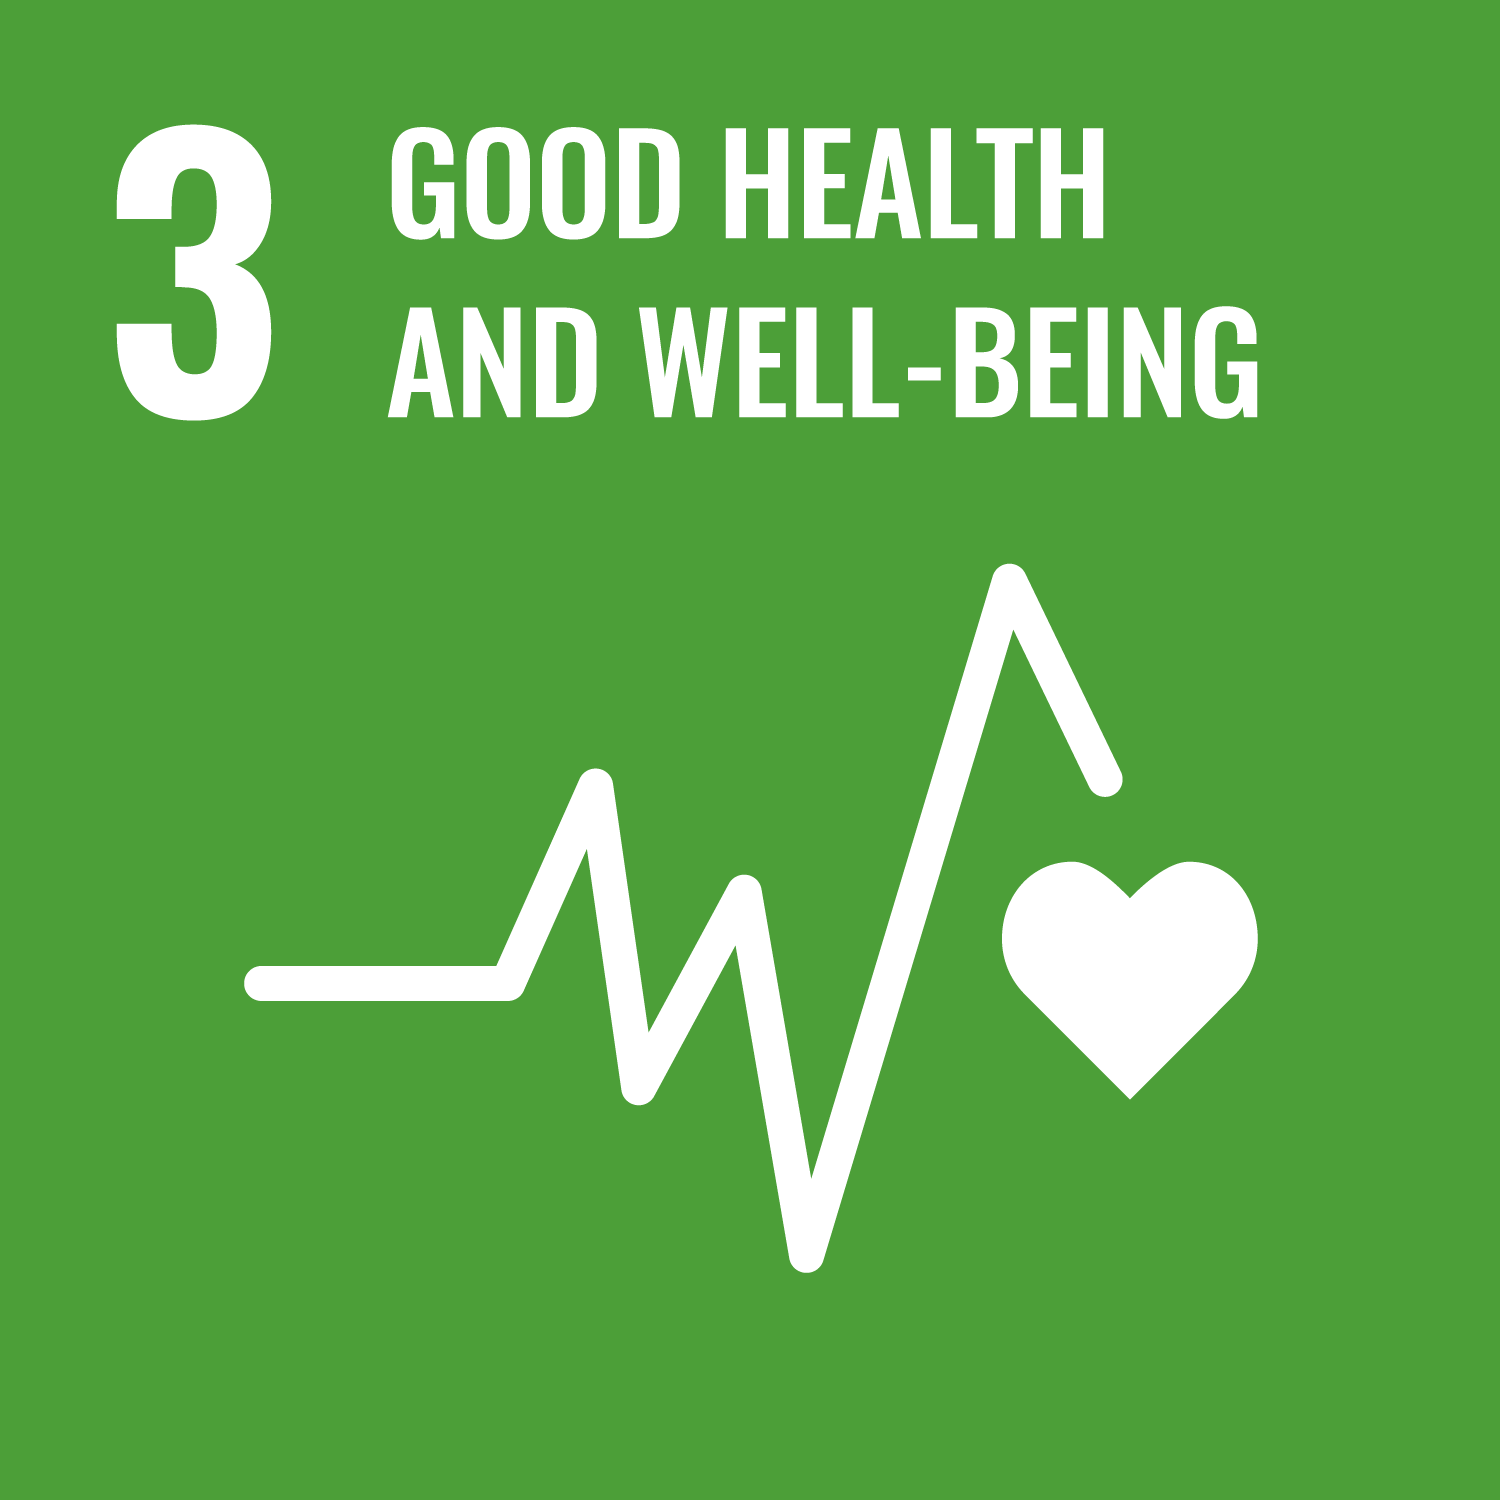 3: Good health and well-being.